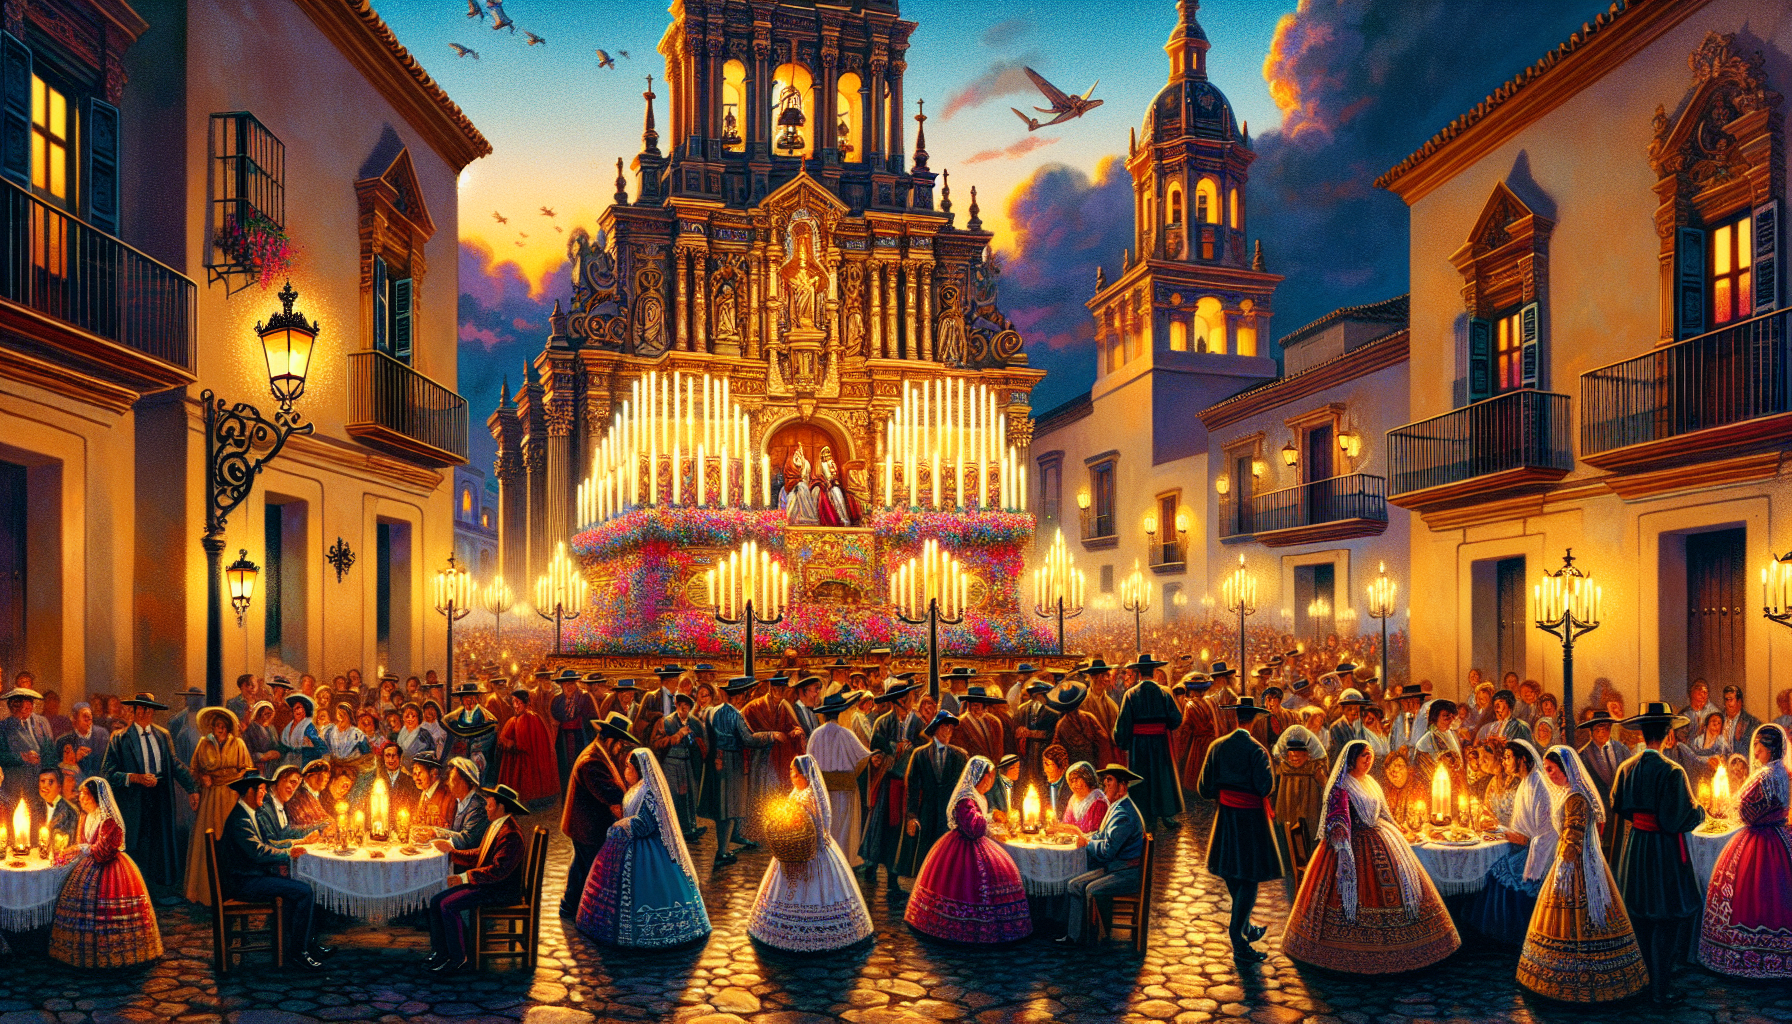 An intricate scene of the Octava de Cuaresma celebration featuring traditional Spanish religious processions, people in colorful traditional costumes, ornate church altars adorned with candles and flo